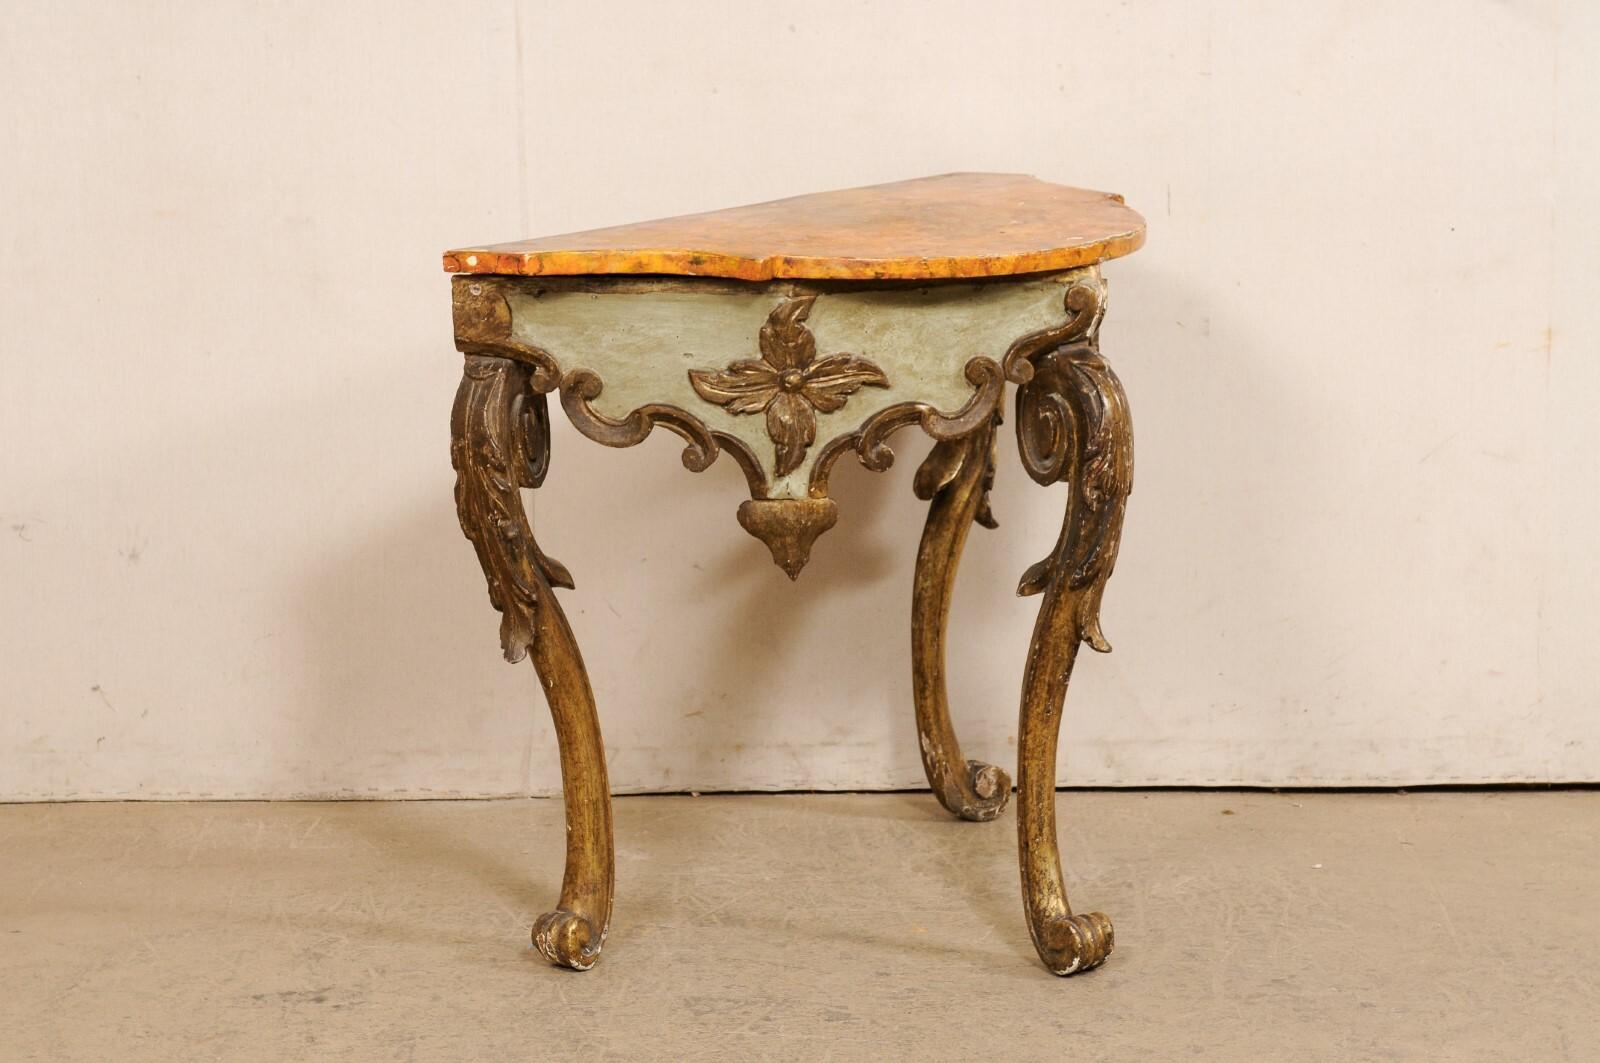 A unique Spanish carved and painted wood console table from the early 19th century (possibly older). This antique Baroque style console table from Spain has a curvaceous design with a faux-marble top that is outwardly scalloped at front, convex